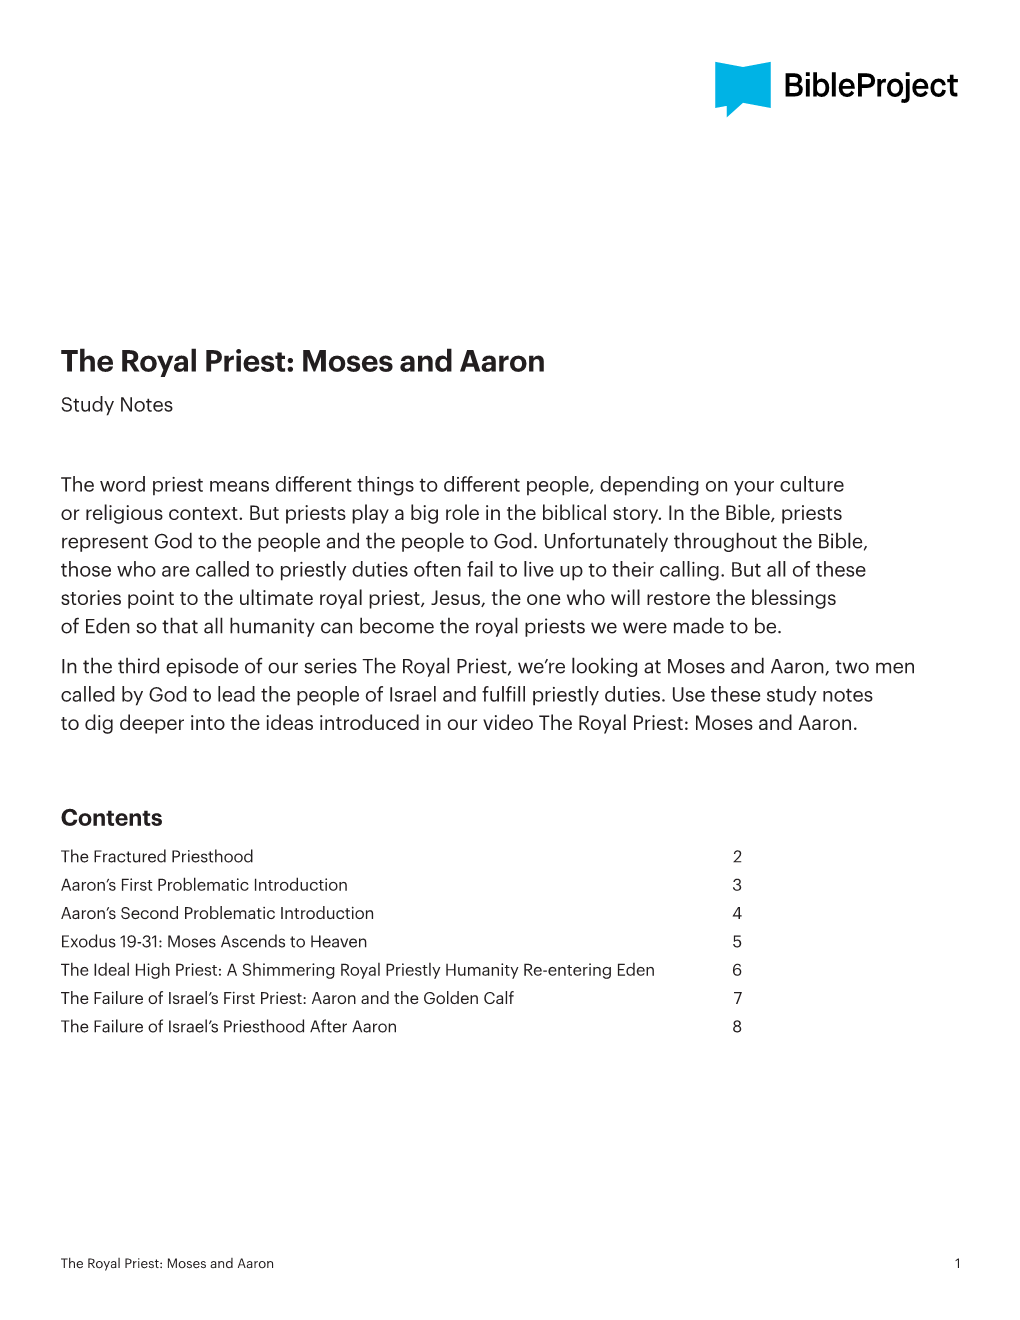 The Royal Priest: Moses and Aaron Study Notes